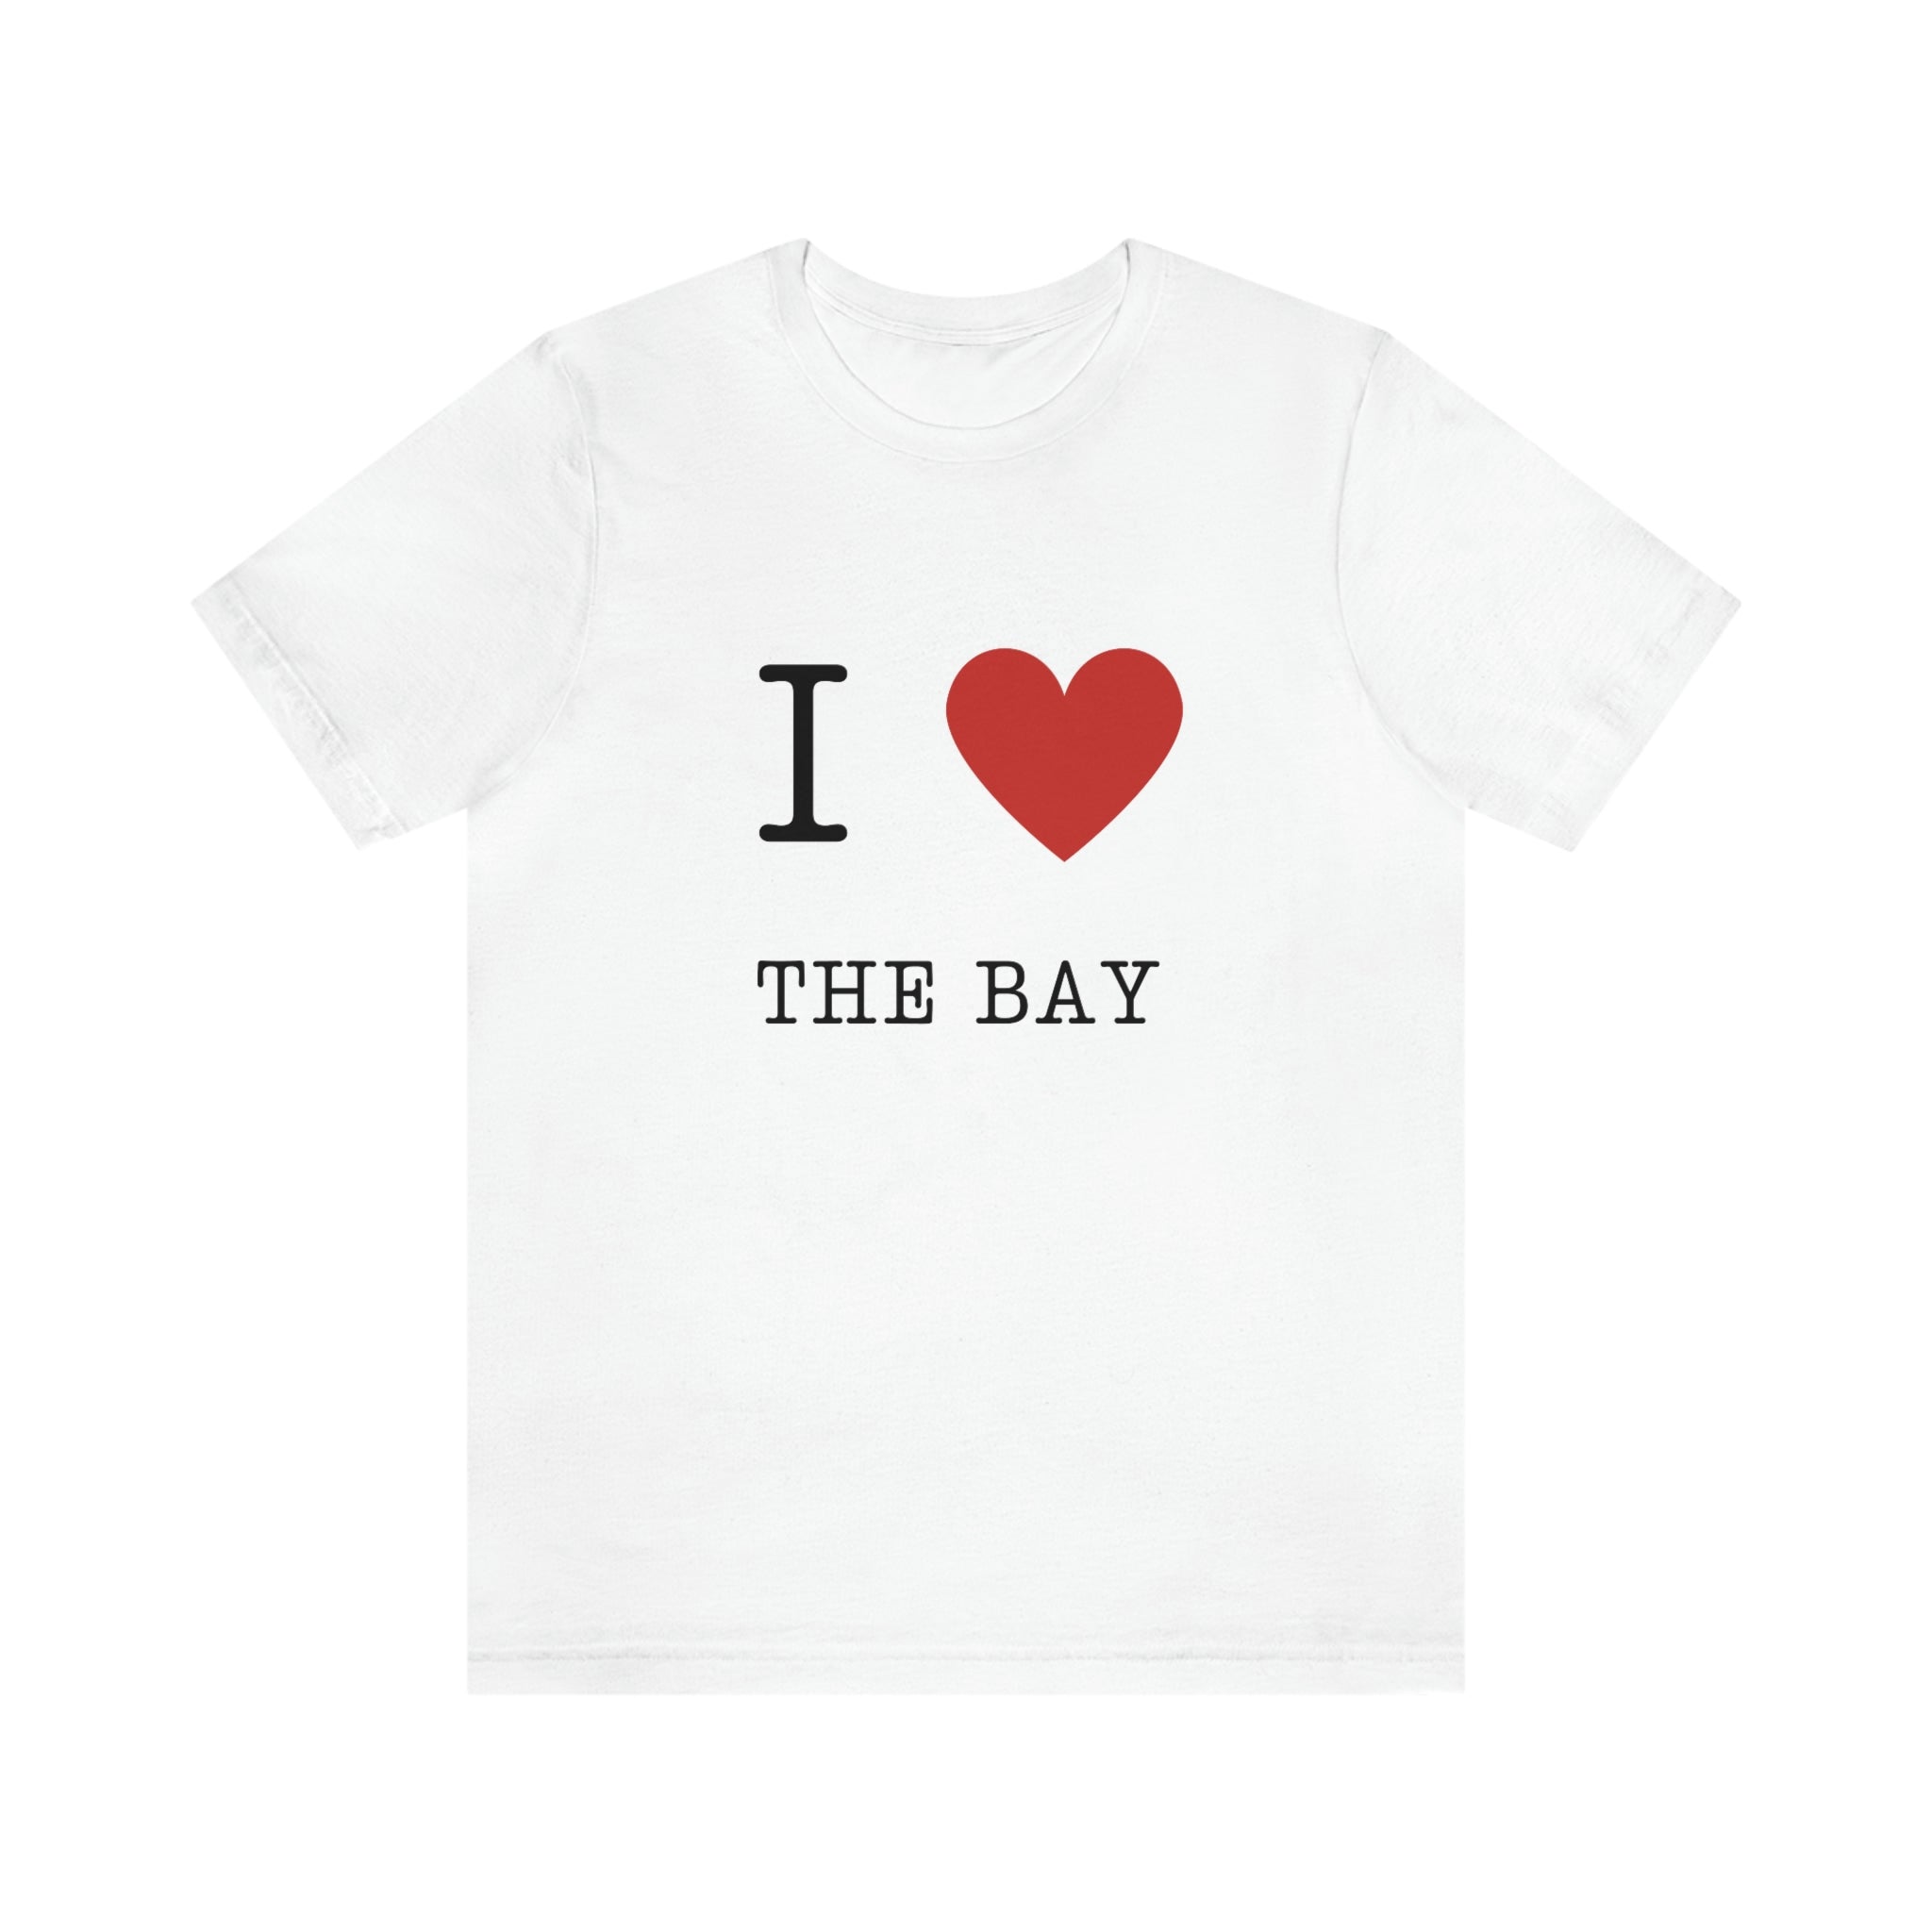 Love Your Club Unisex Tee - The Bay